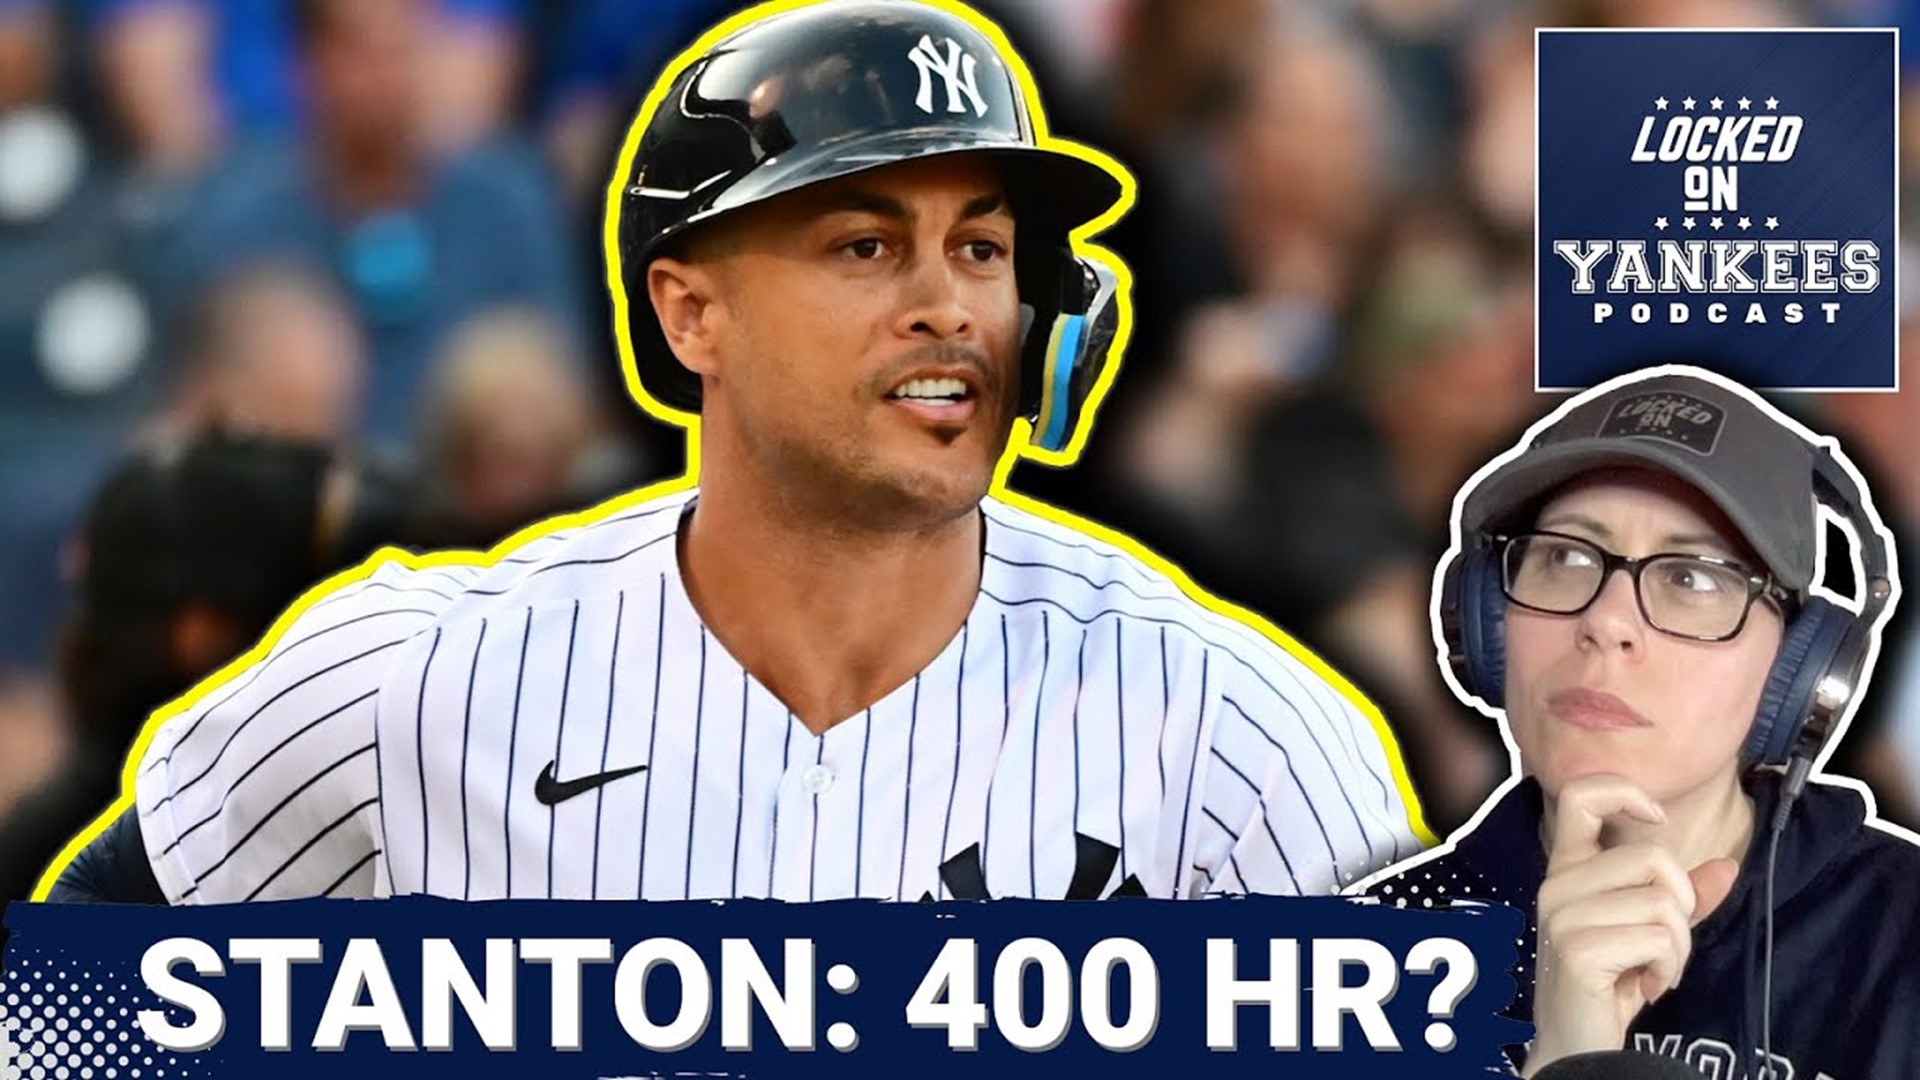 Giancarlo Stanton has had an injury-laden tenure with the New York Yankees over the last few seasons. Can he have a healthy 2023?